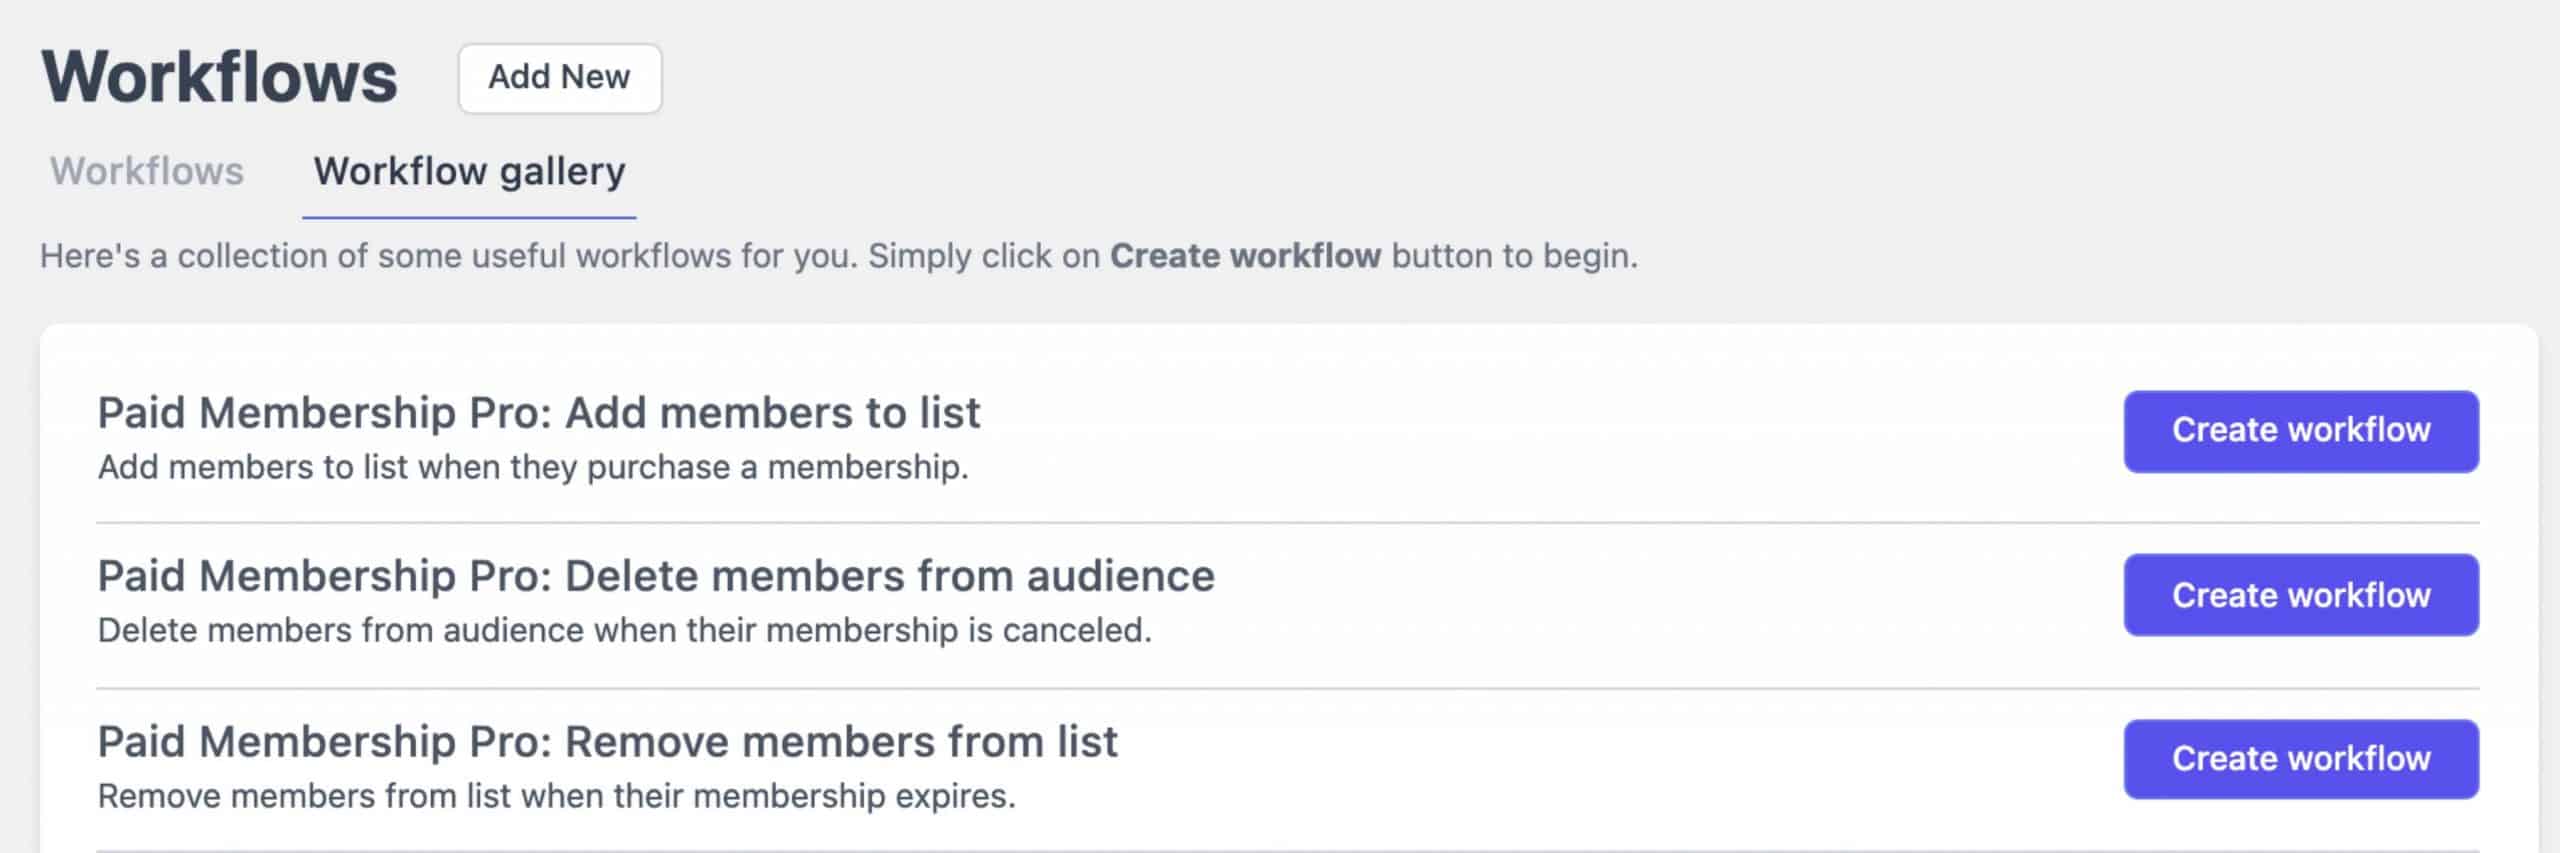 Email Subscribers and Paid Memberships Pro Workflows